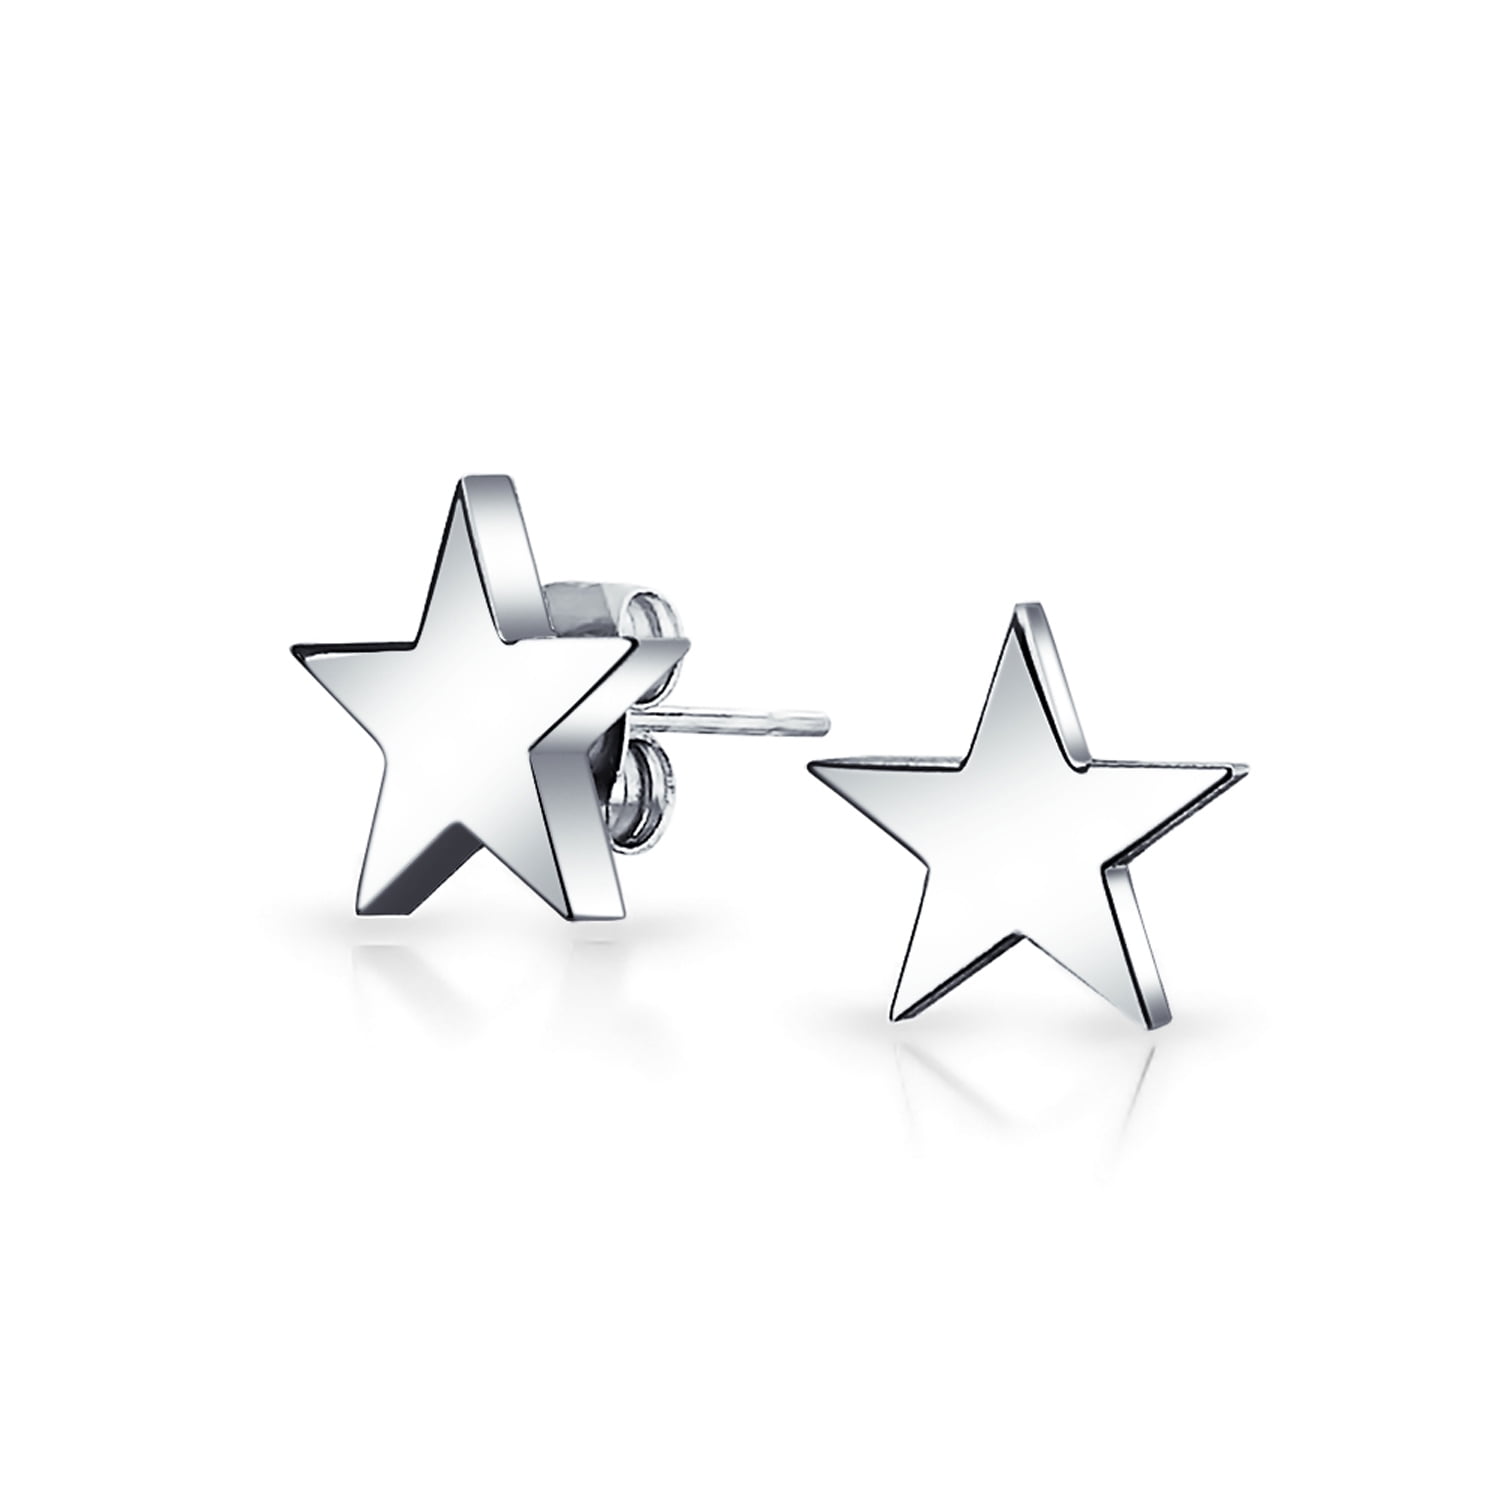 Personalize Simple Patriotic Celestial Star Stud Earrings For Men And Women Black Polished Finish Stainless Steel 10MM